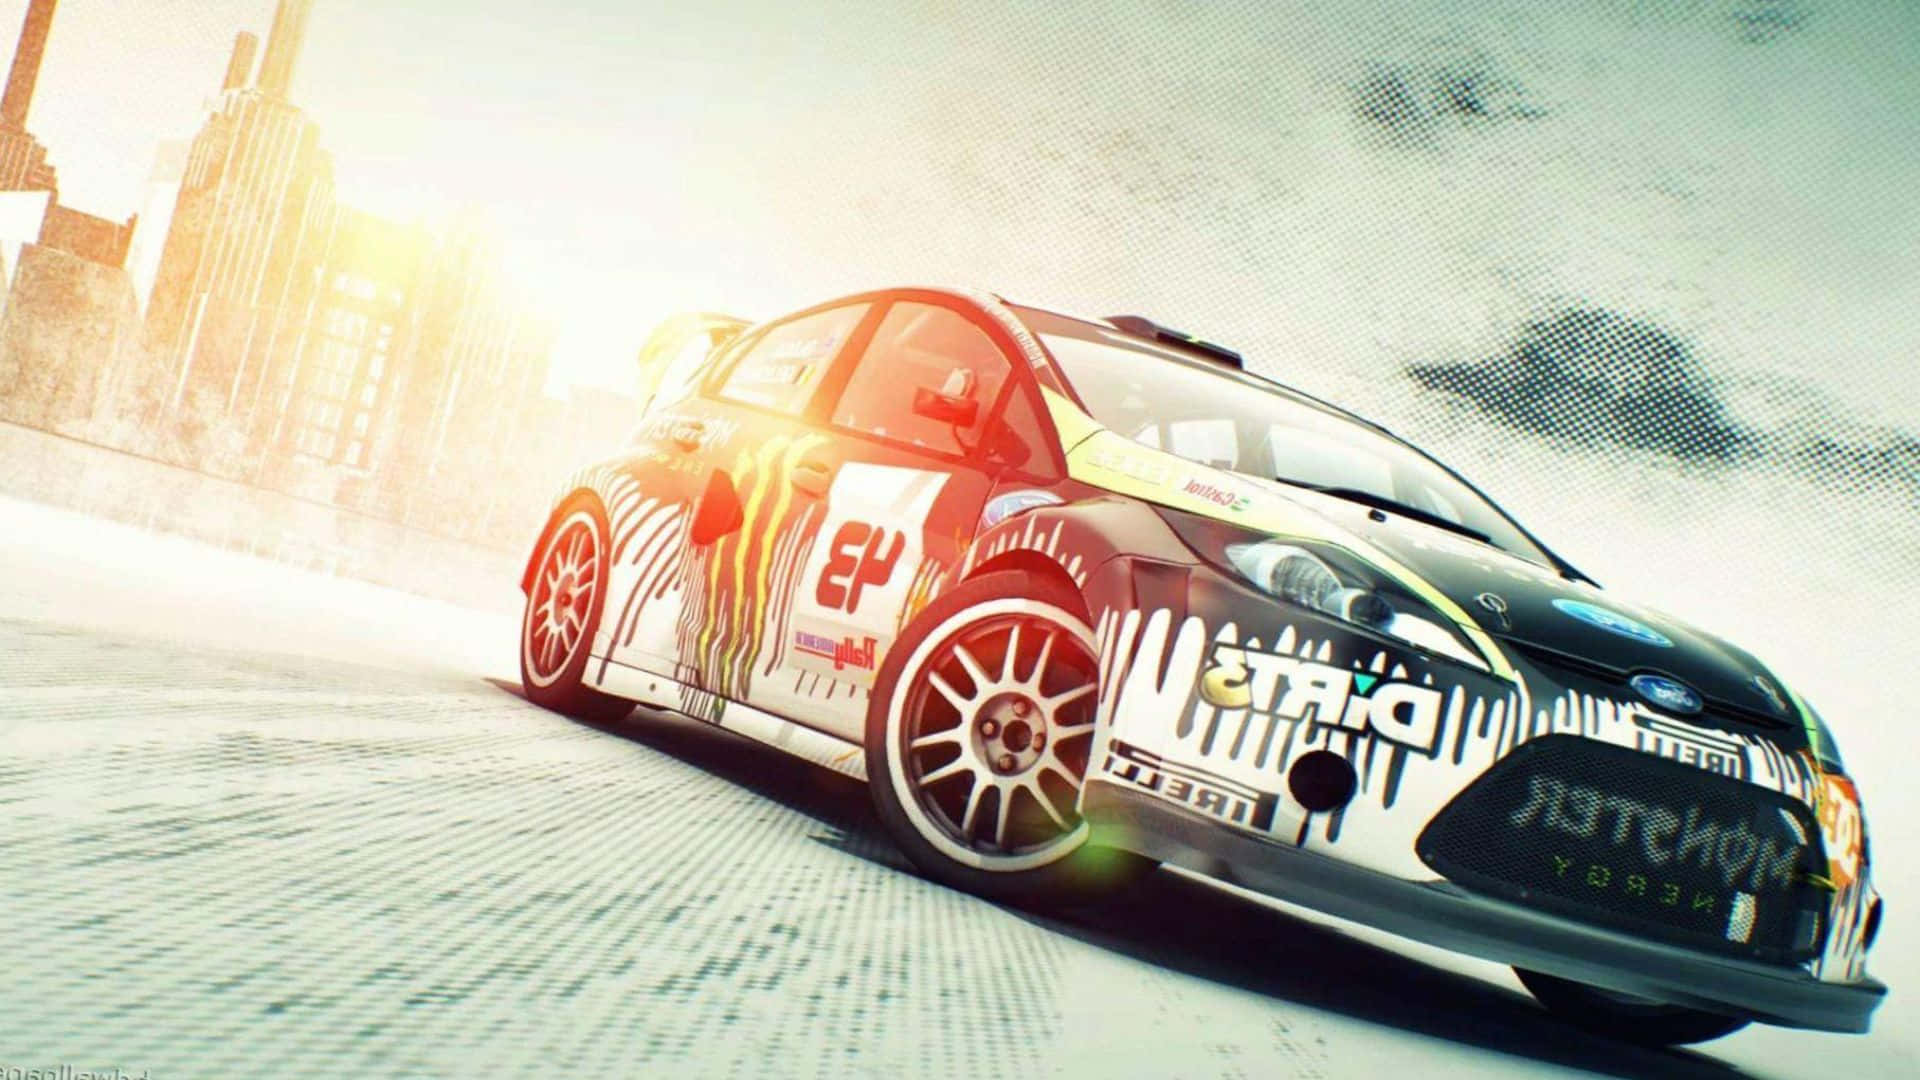 Join the Thrills with 1080p Dirt 3